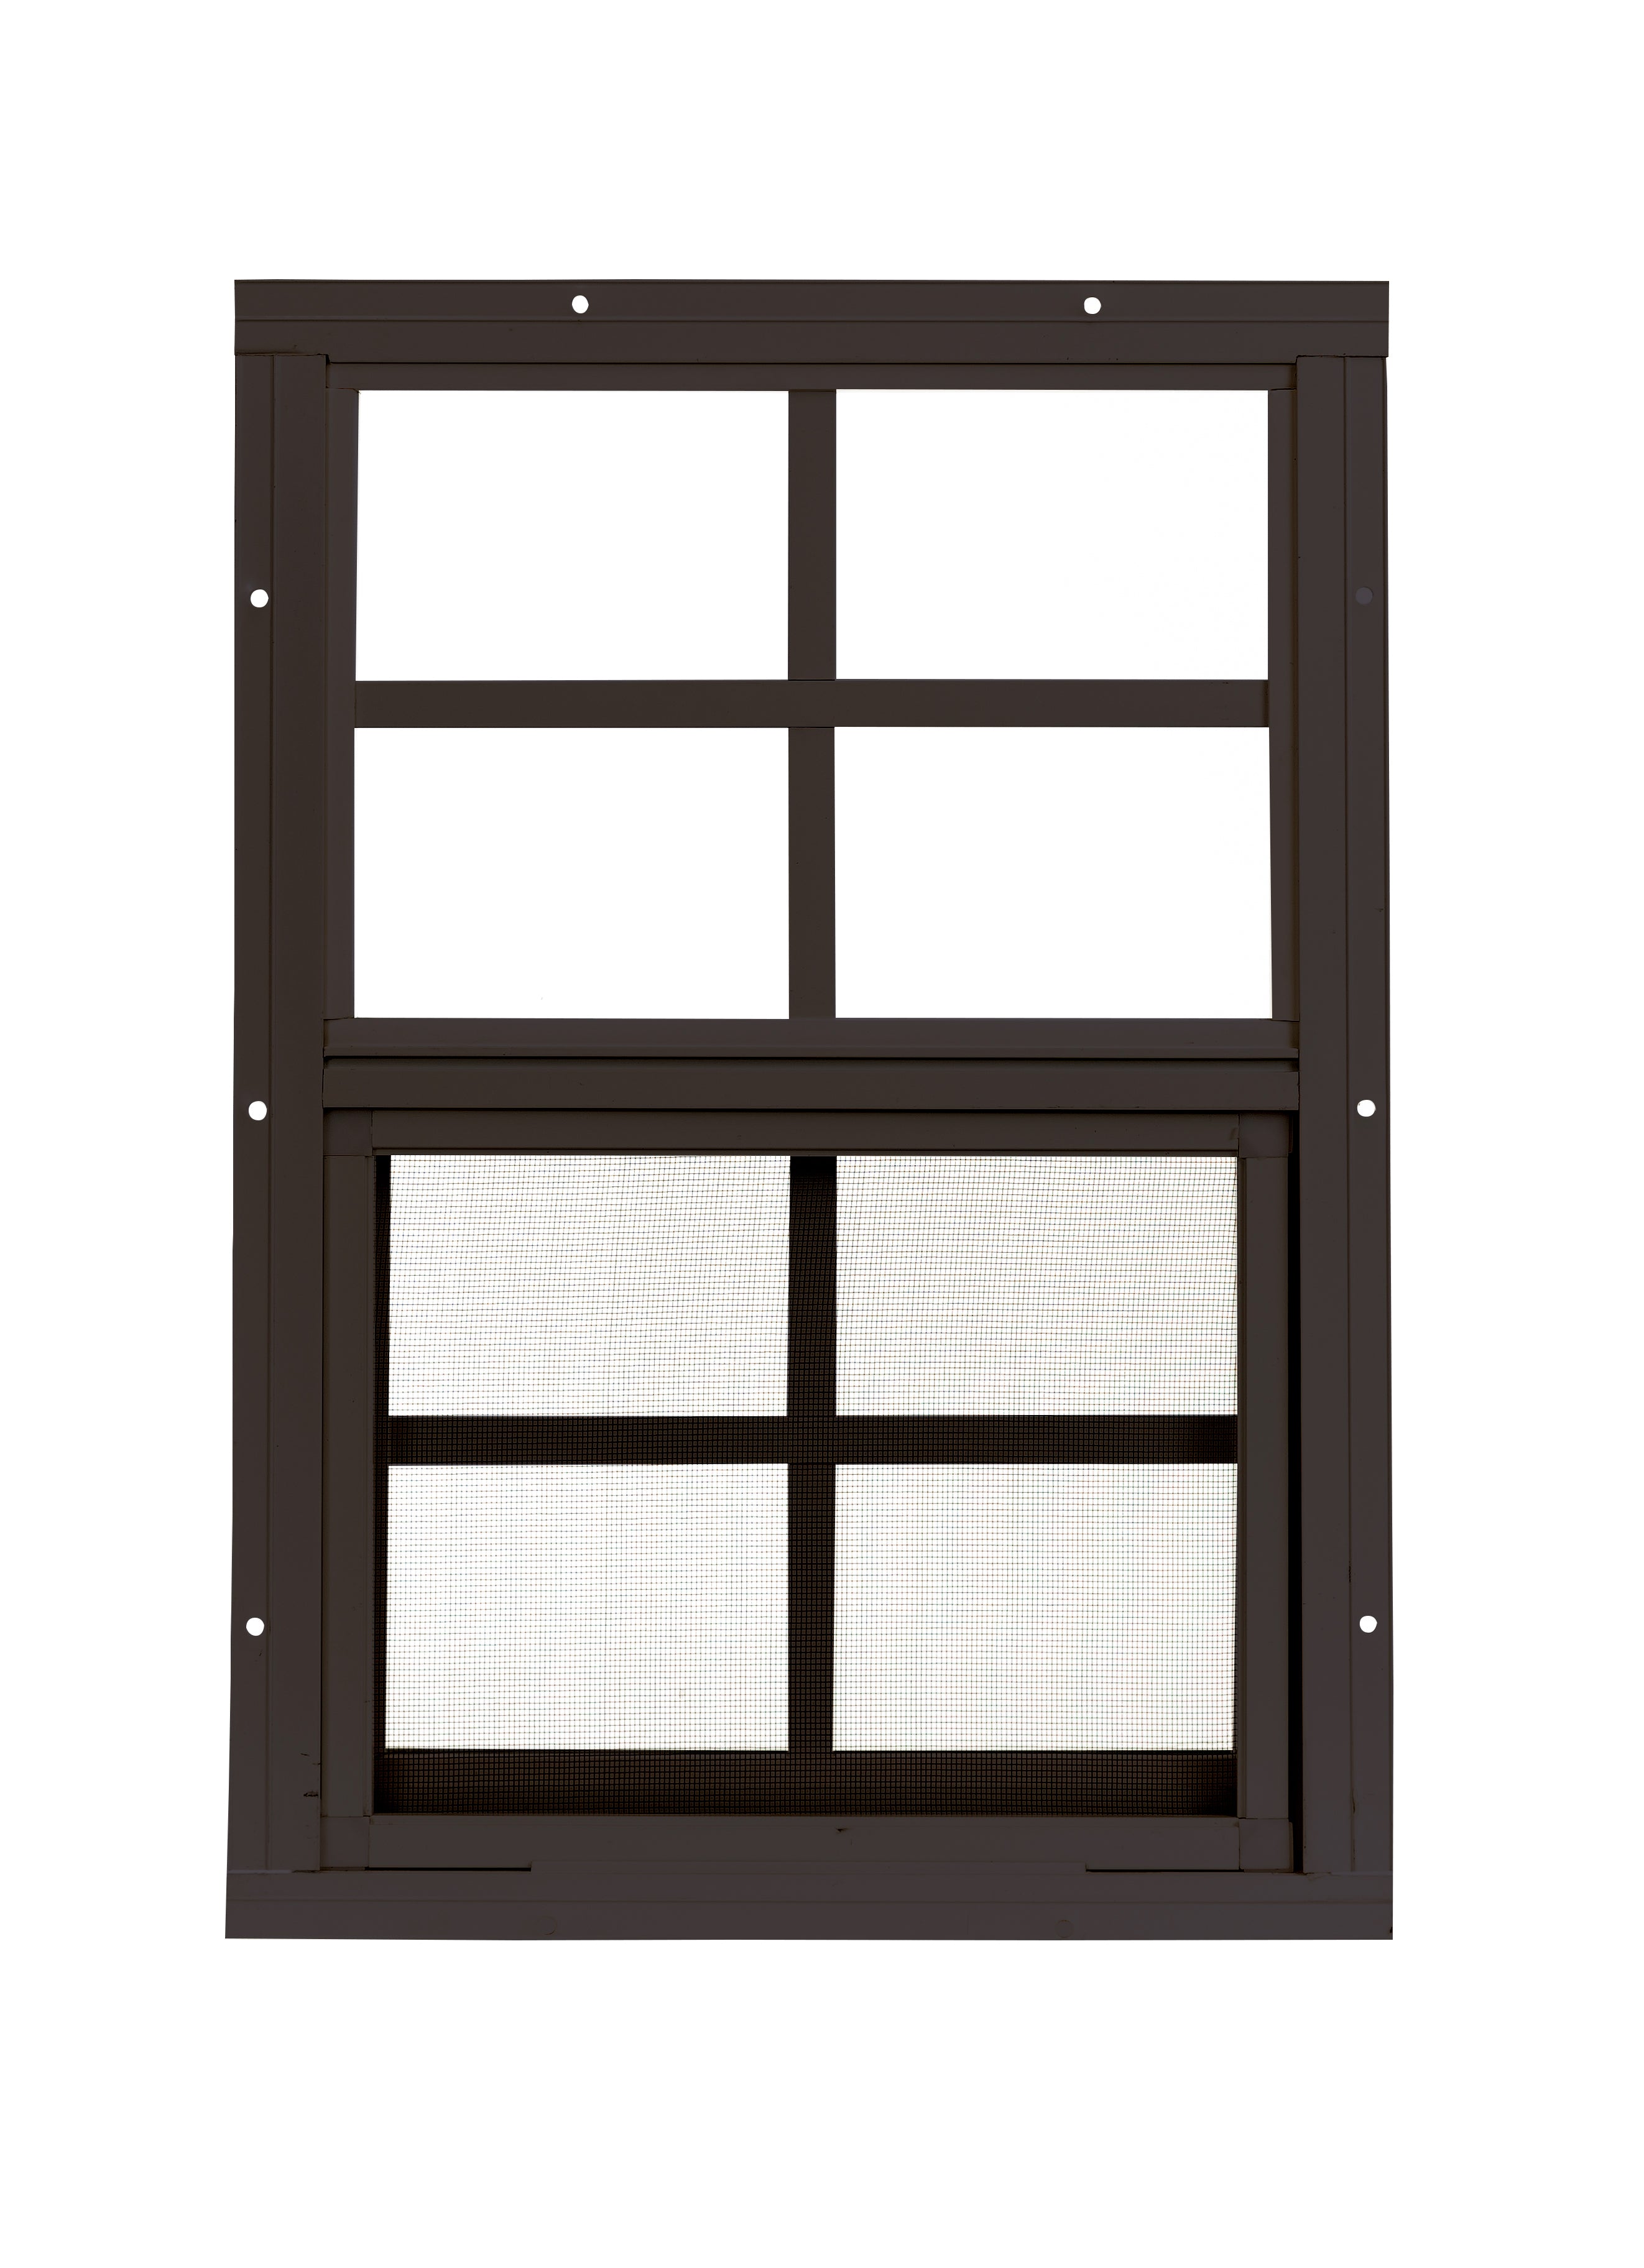 12" W x 18" H Single Hung Flush Mount Brown Window for Sheds, Playhouses, and MORE 